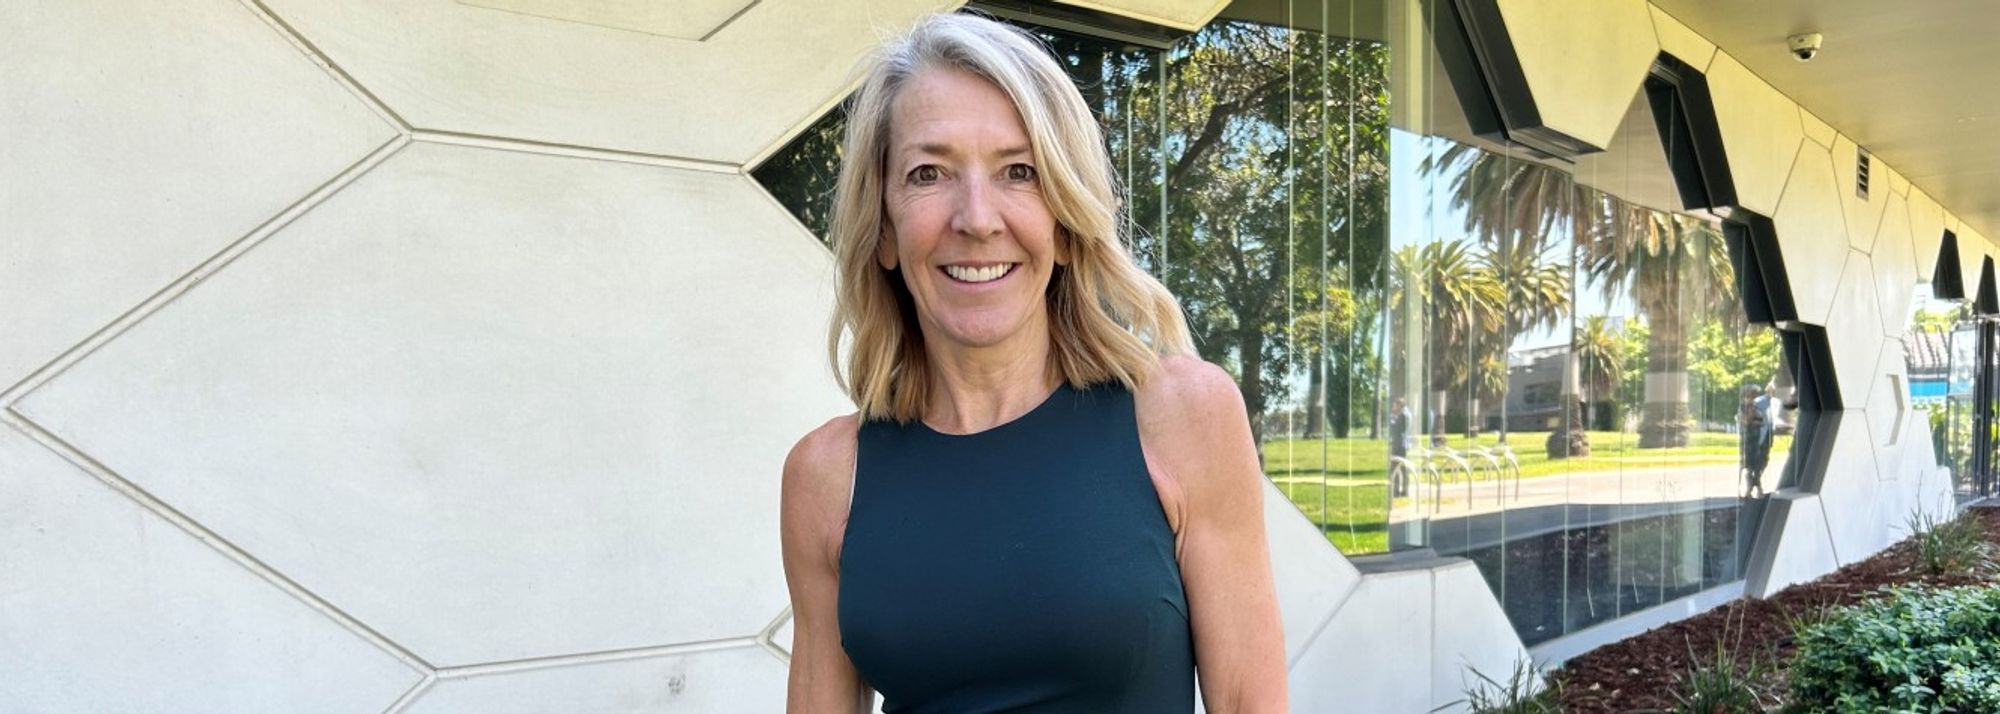 Athletics Australia President Jane Flemming feels the sport in her home country is poised for an exciting decade ahead.